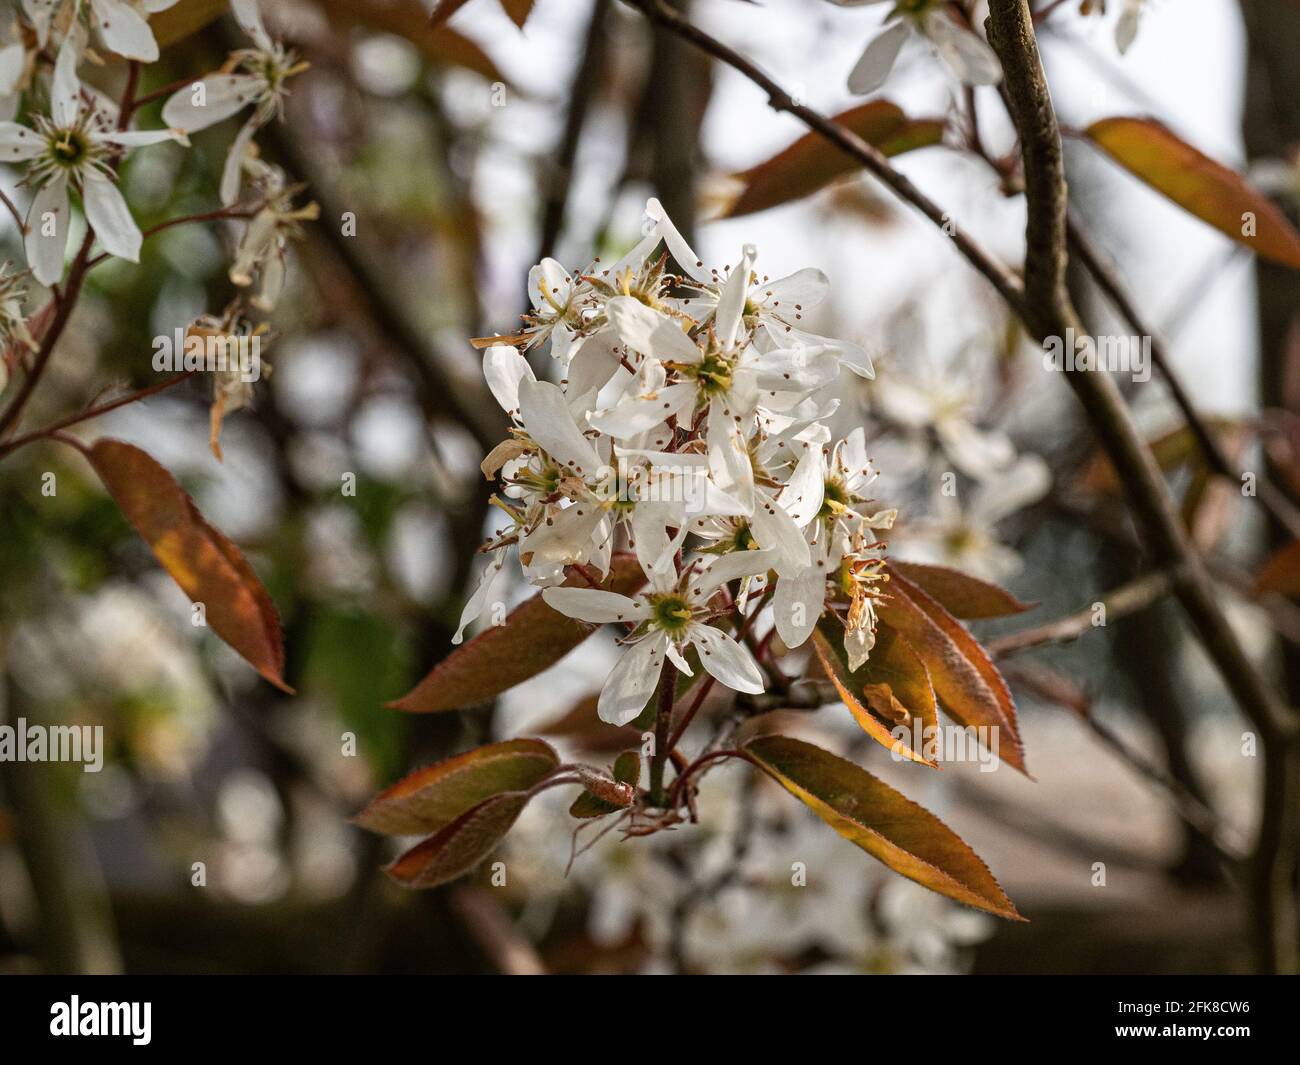 A close up of a single clusted of the starry white flowers of Amelanchier lamarckii Stock Photo